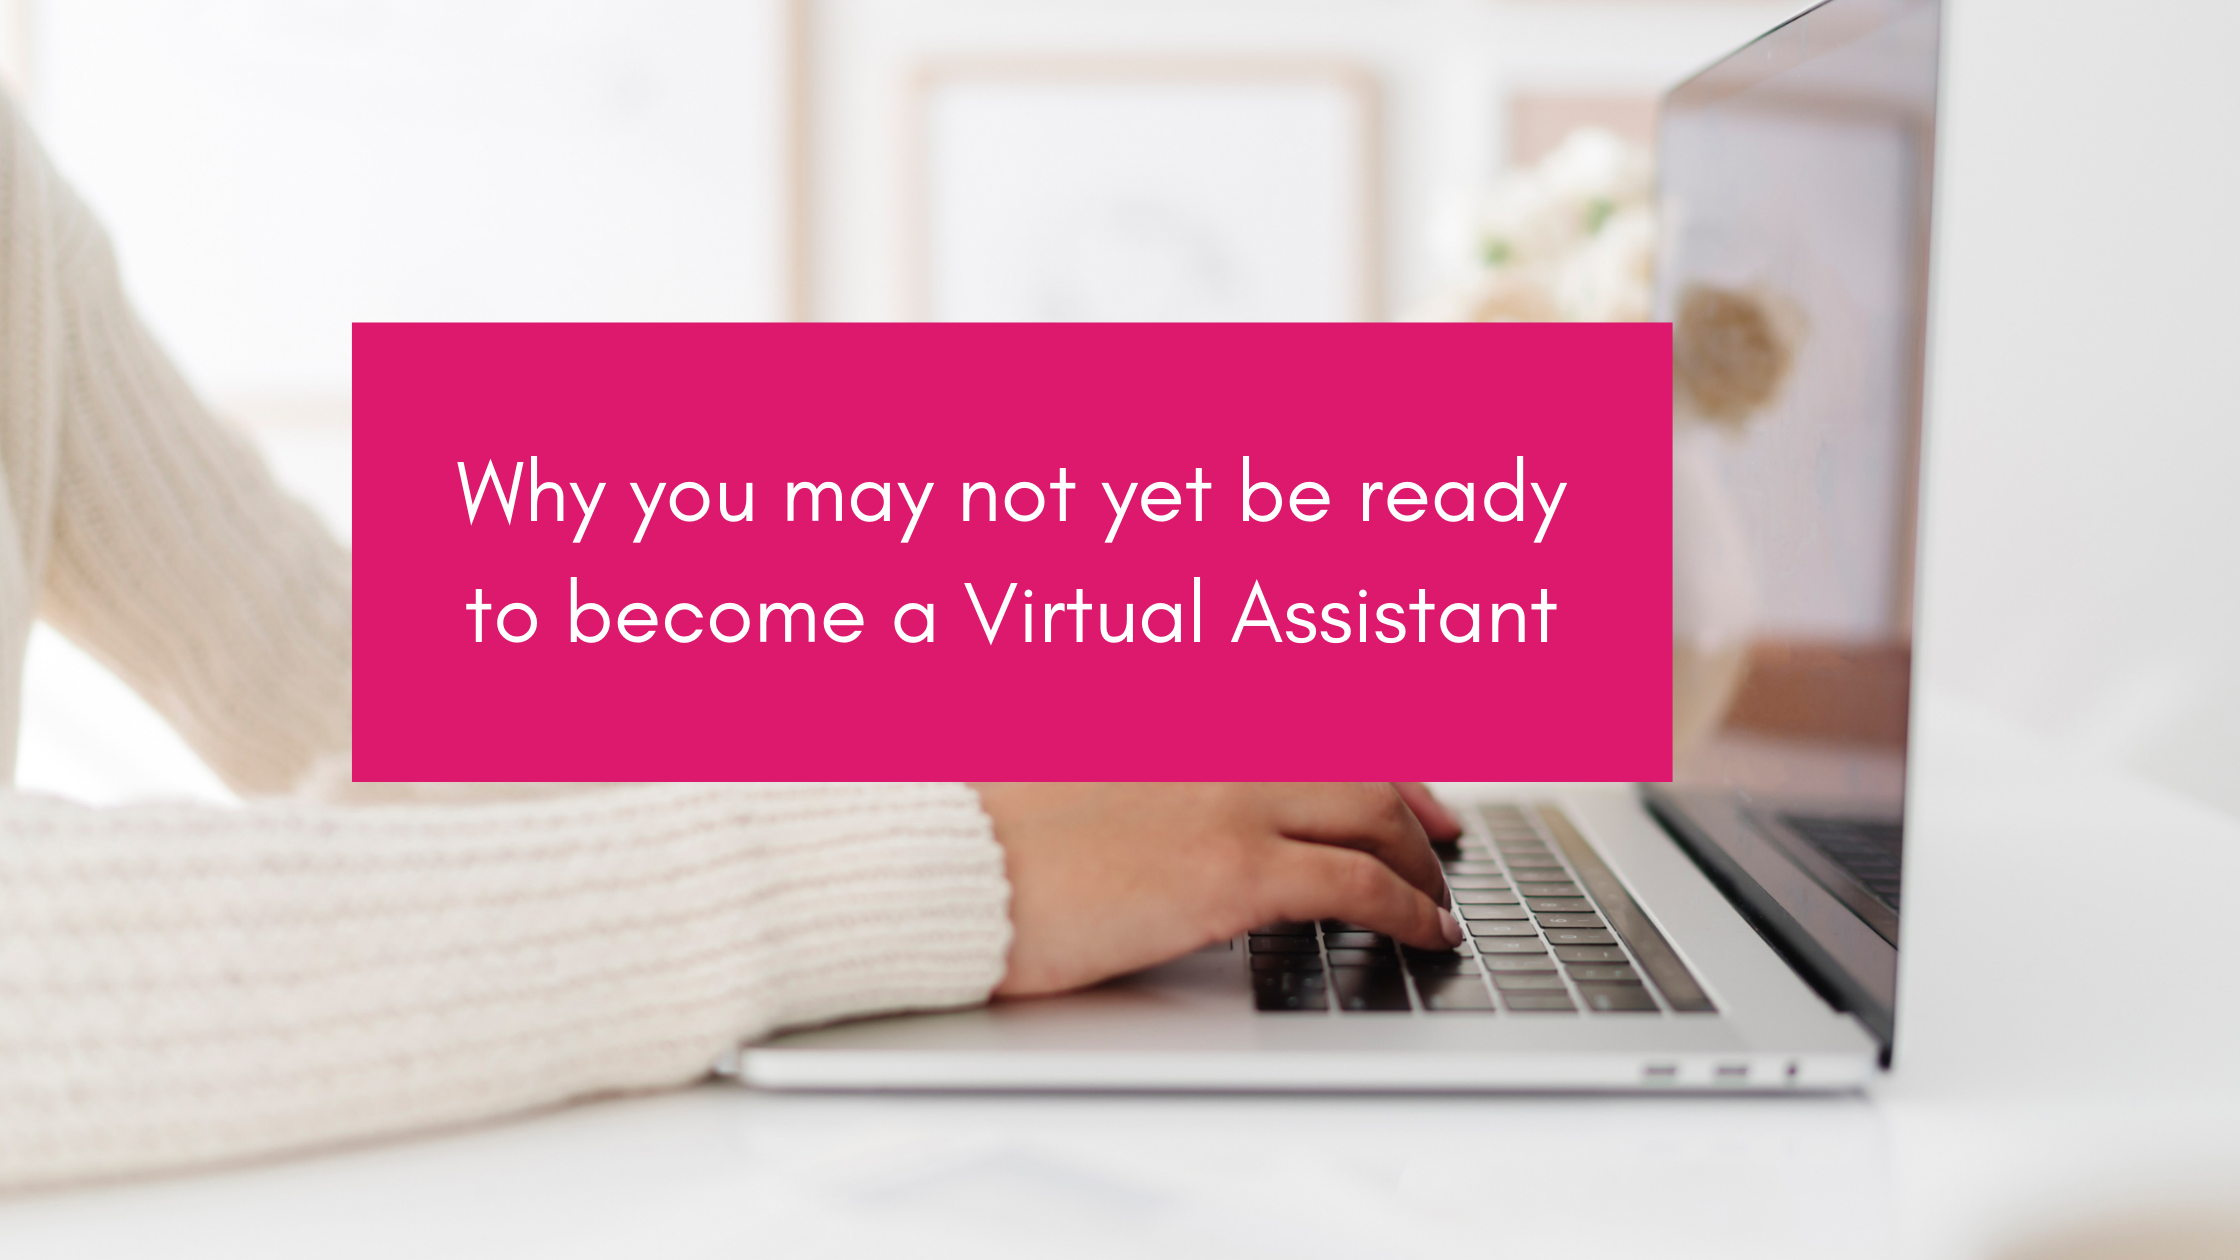 Why you may not yet be ready to become a Virtual Assistant